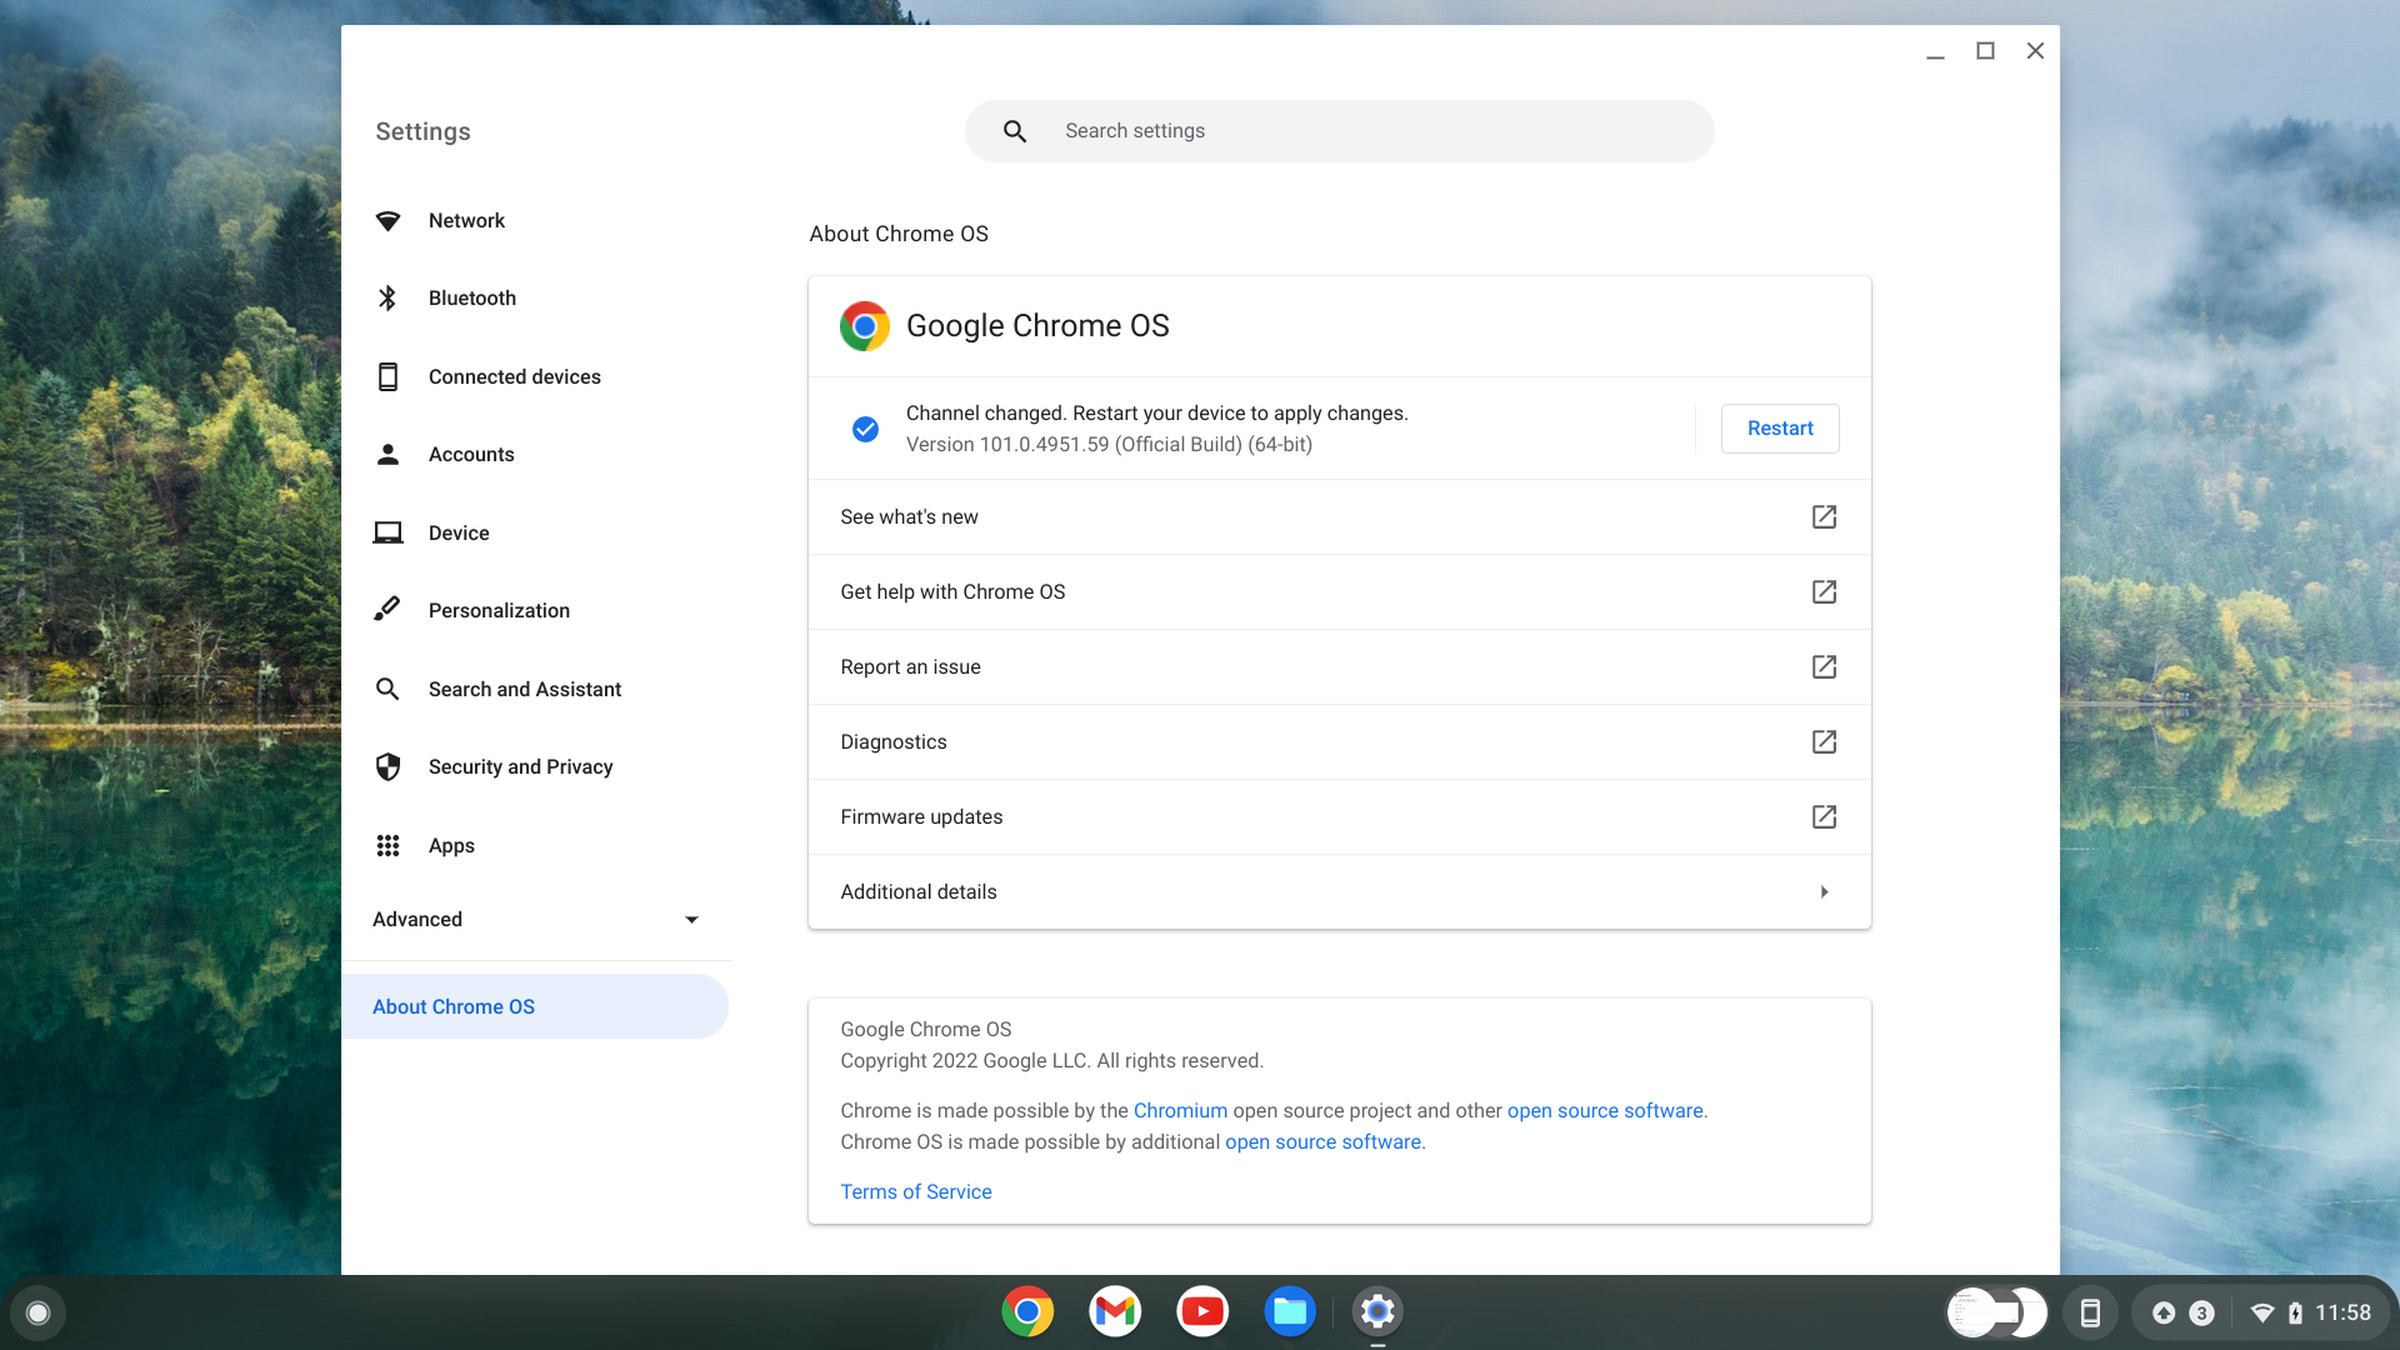 About Chrome OS page with Restart button